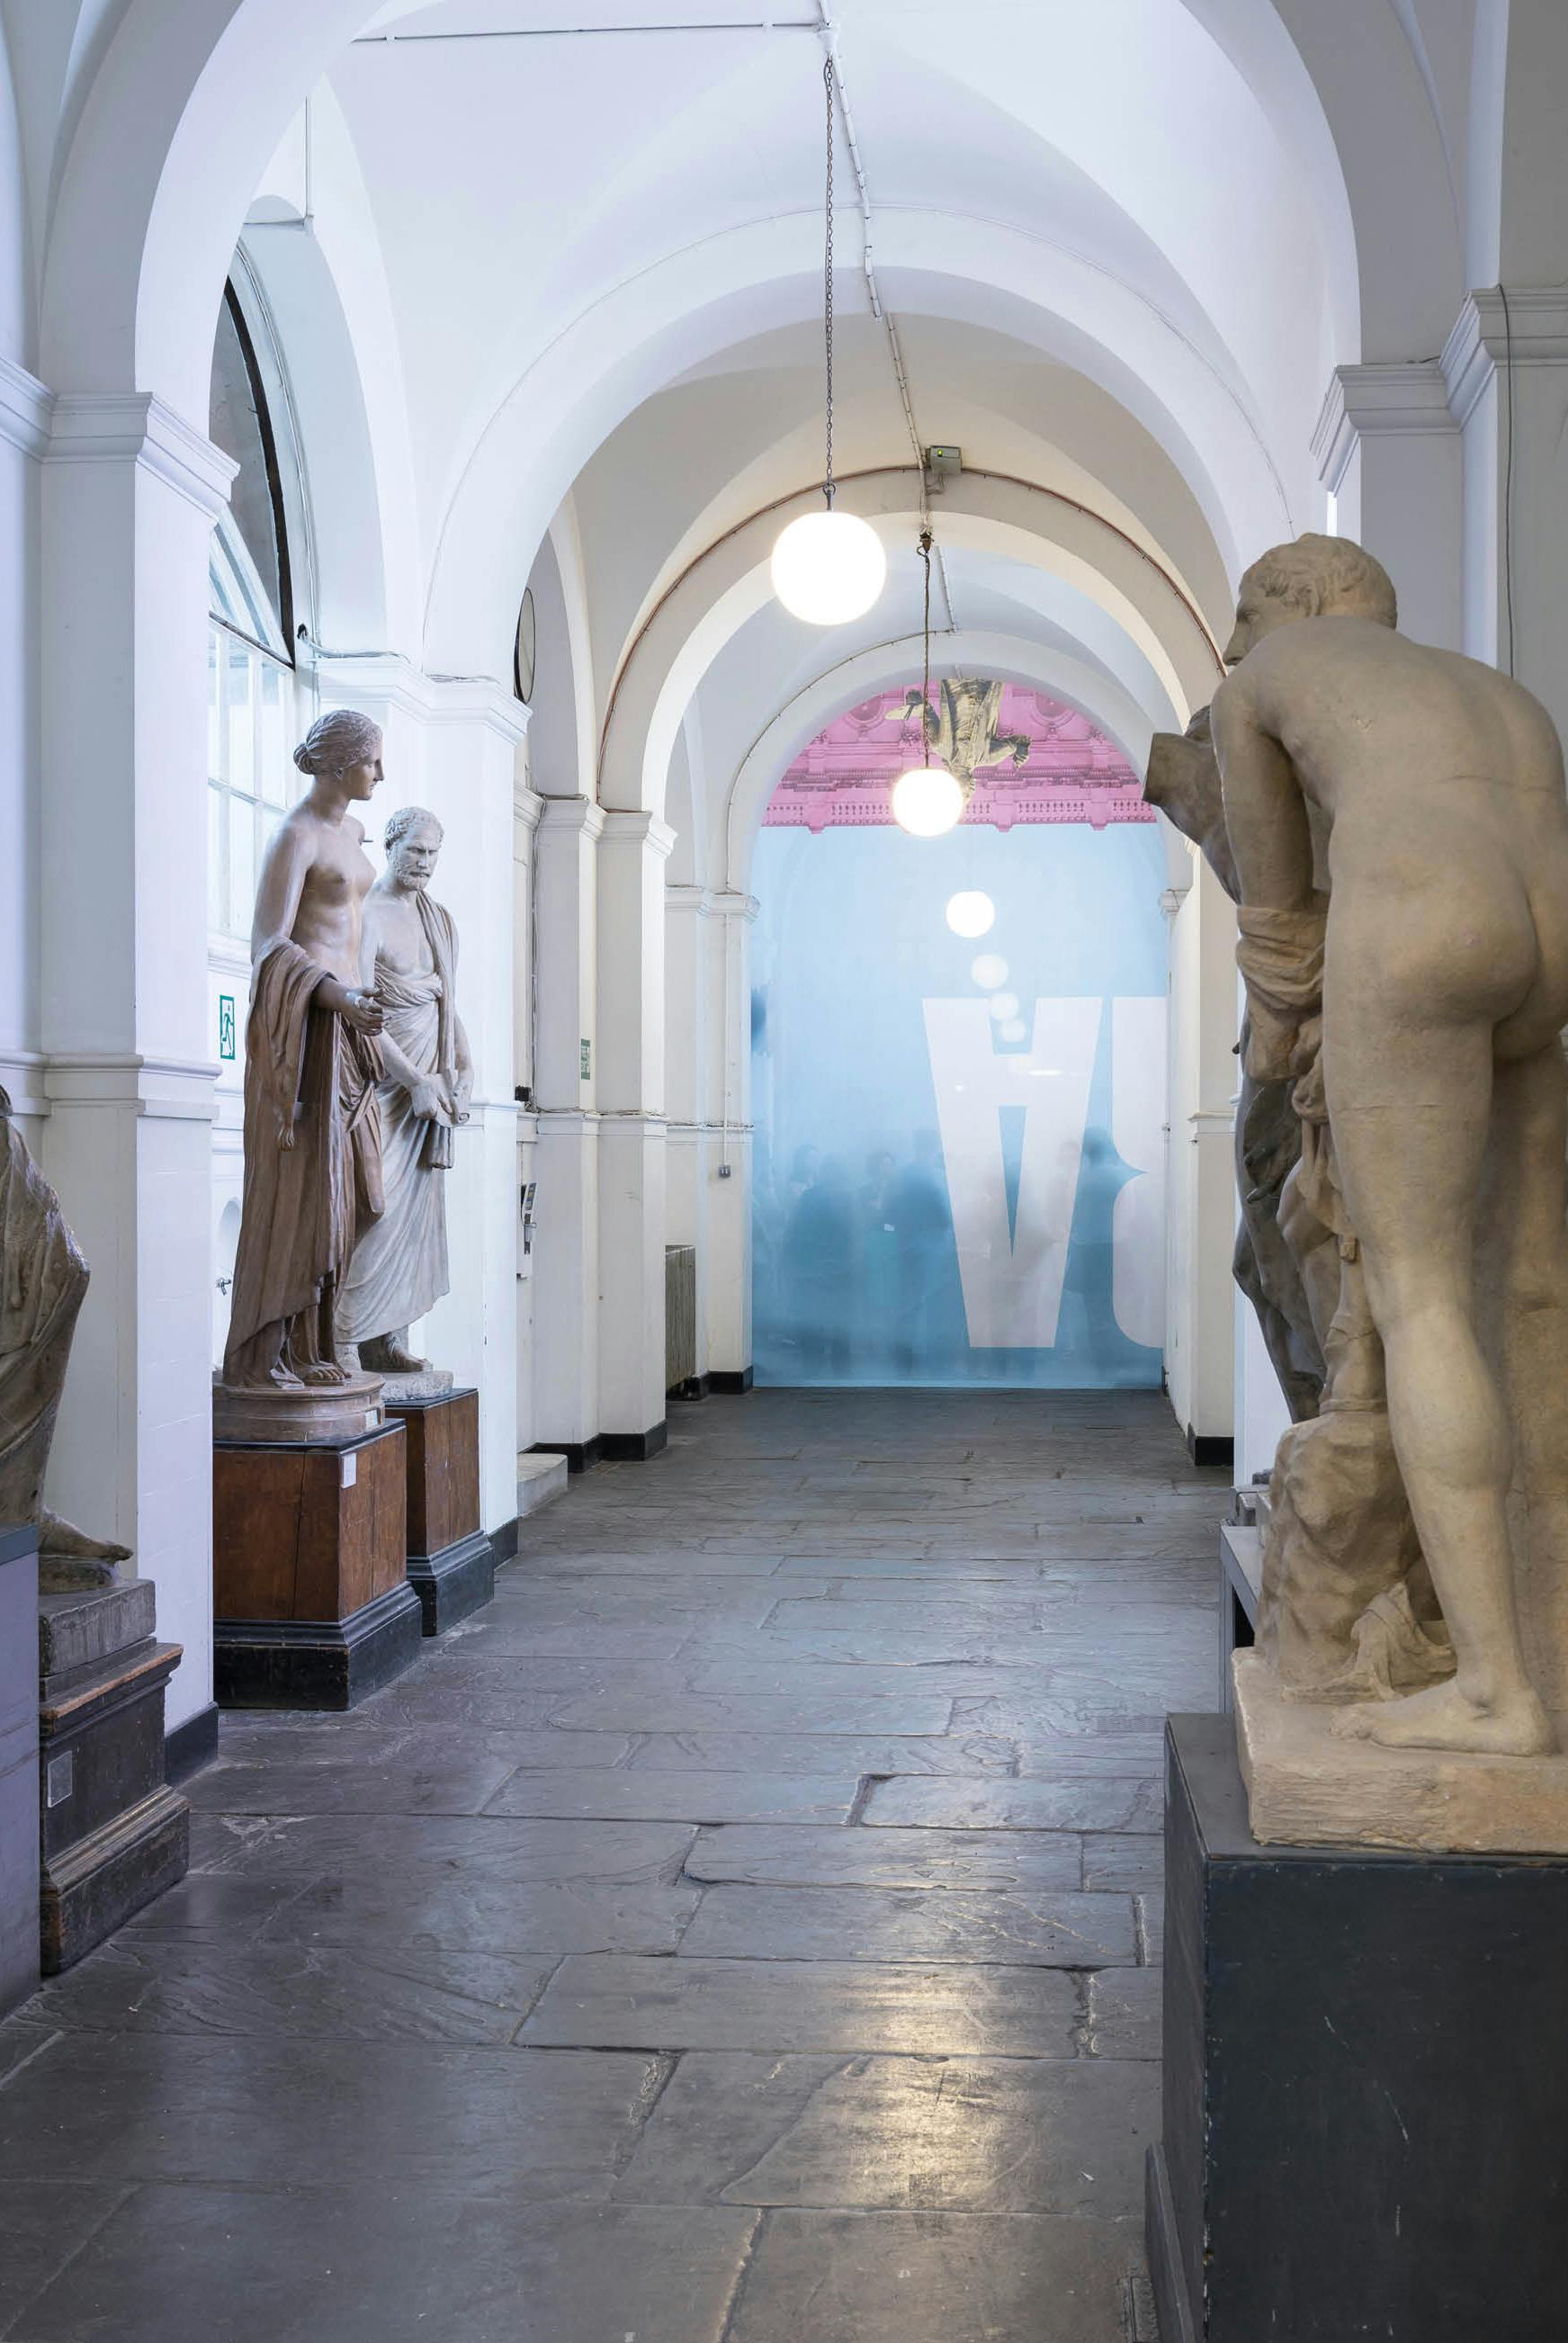 'The Greater Order', Sculptural installation by artist Henry Coleman across the Royal Academy buildings, London. Cast Corridor of the Royal Academy schools divided by a curtain made from the Banner for the Summer exhibition with members of the public shadowed behind